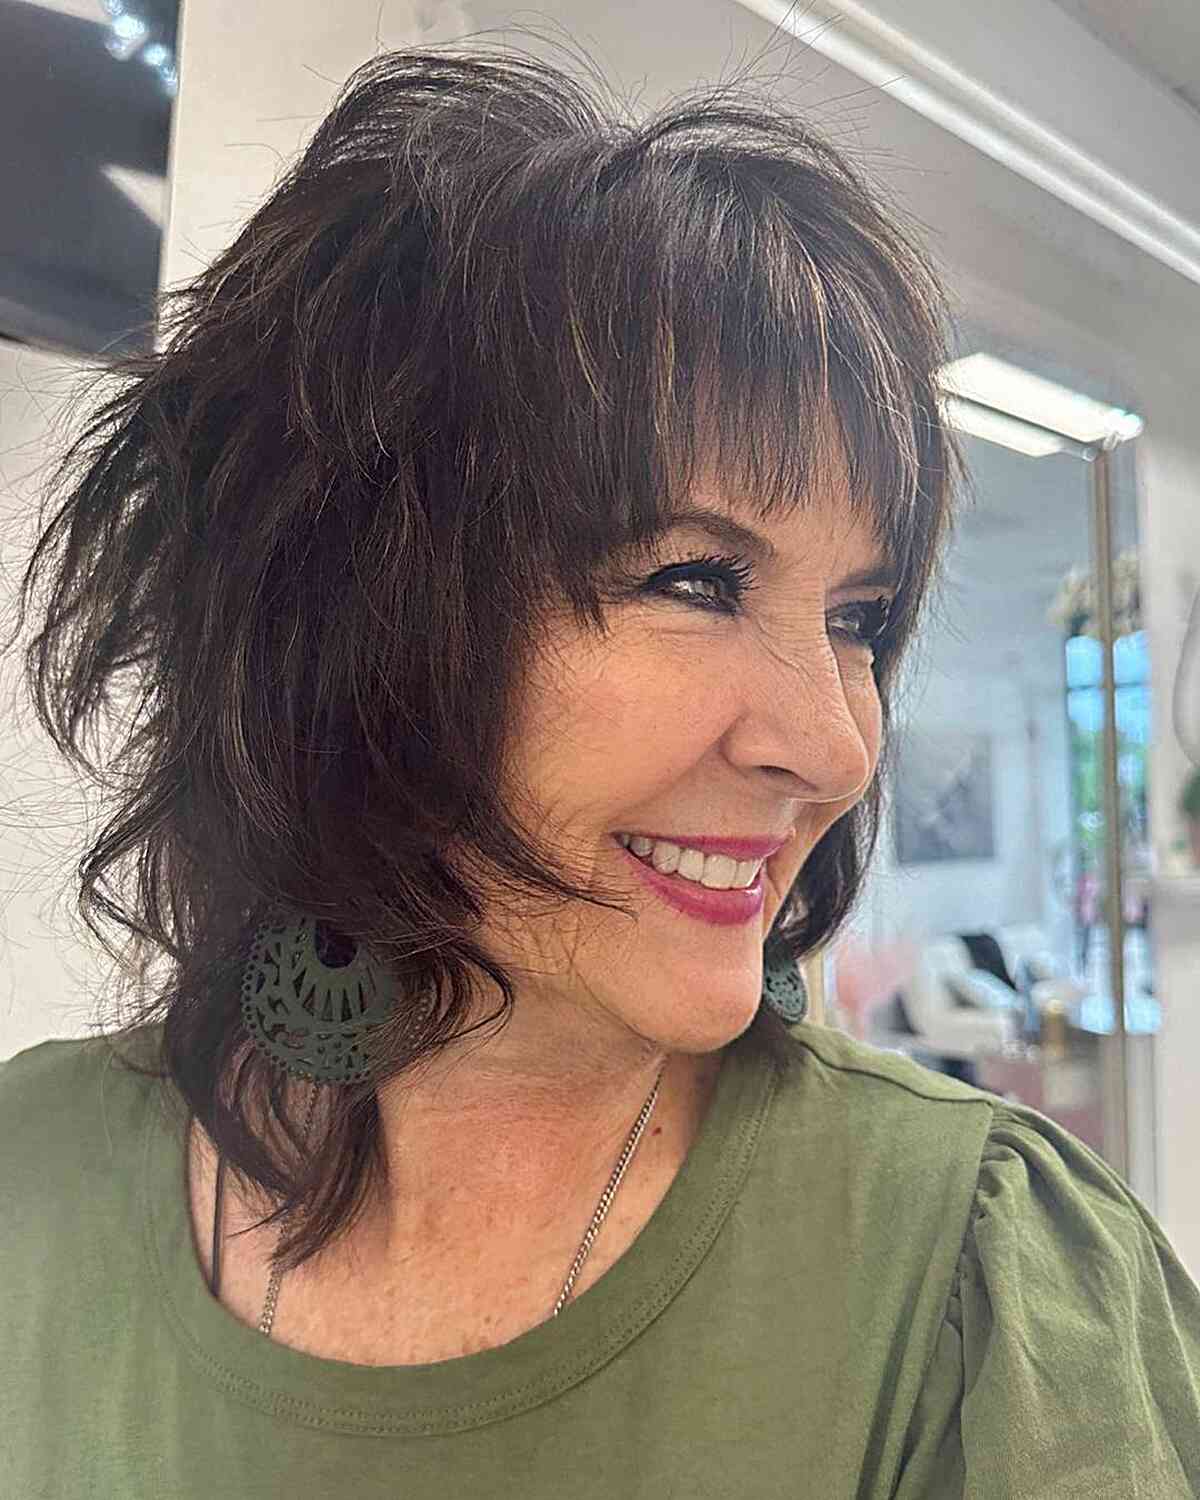 Shaggy Butterfly Hairstyle for Old Ladies with mid-length hair